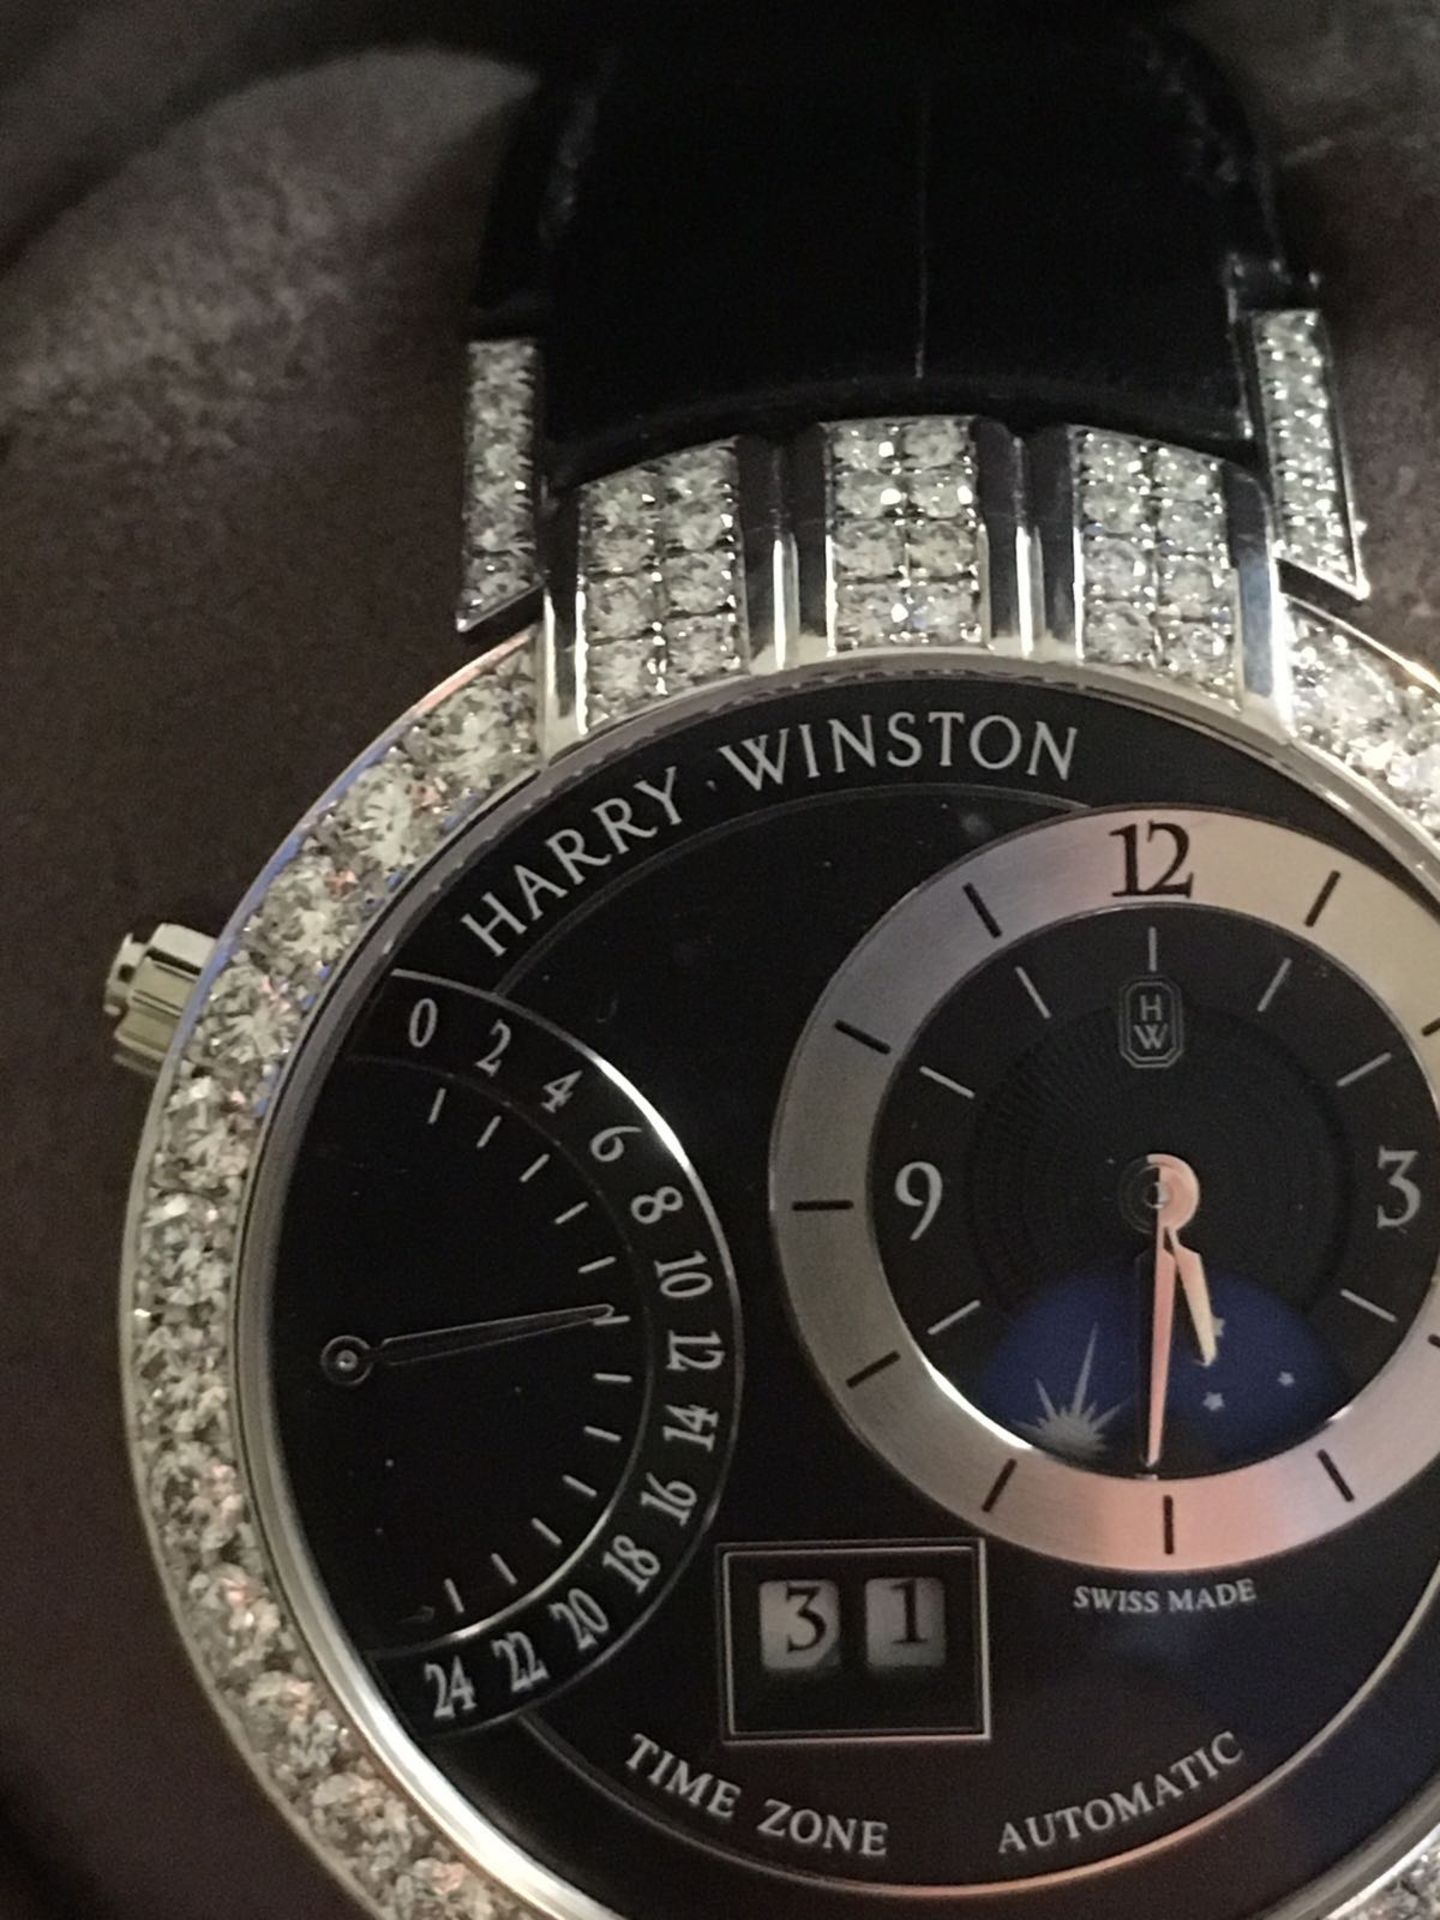 HARRY WINSTON Premier Excenter 18k White Gold Watch with box & papers - Image 9 of 9